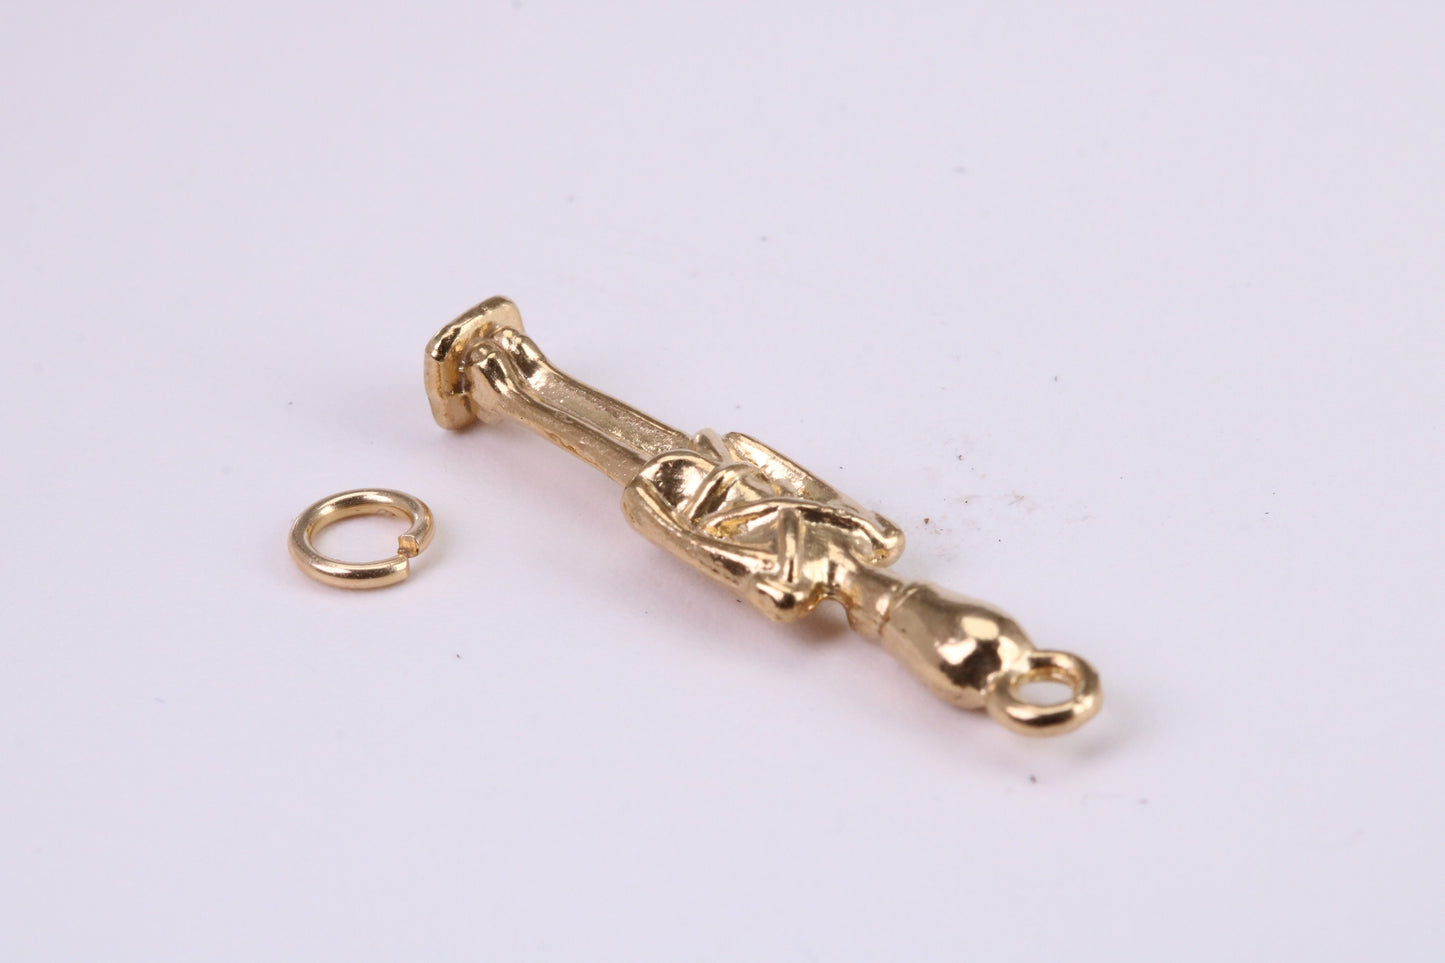 Queens Guard Charm, Traditional Charm, Made from Solid Yellow Gold, British Hallmarked, Complete with Attachment Link